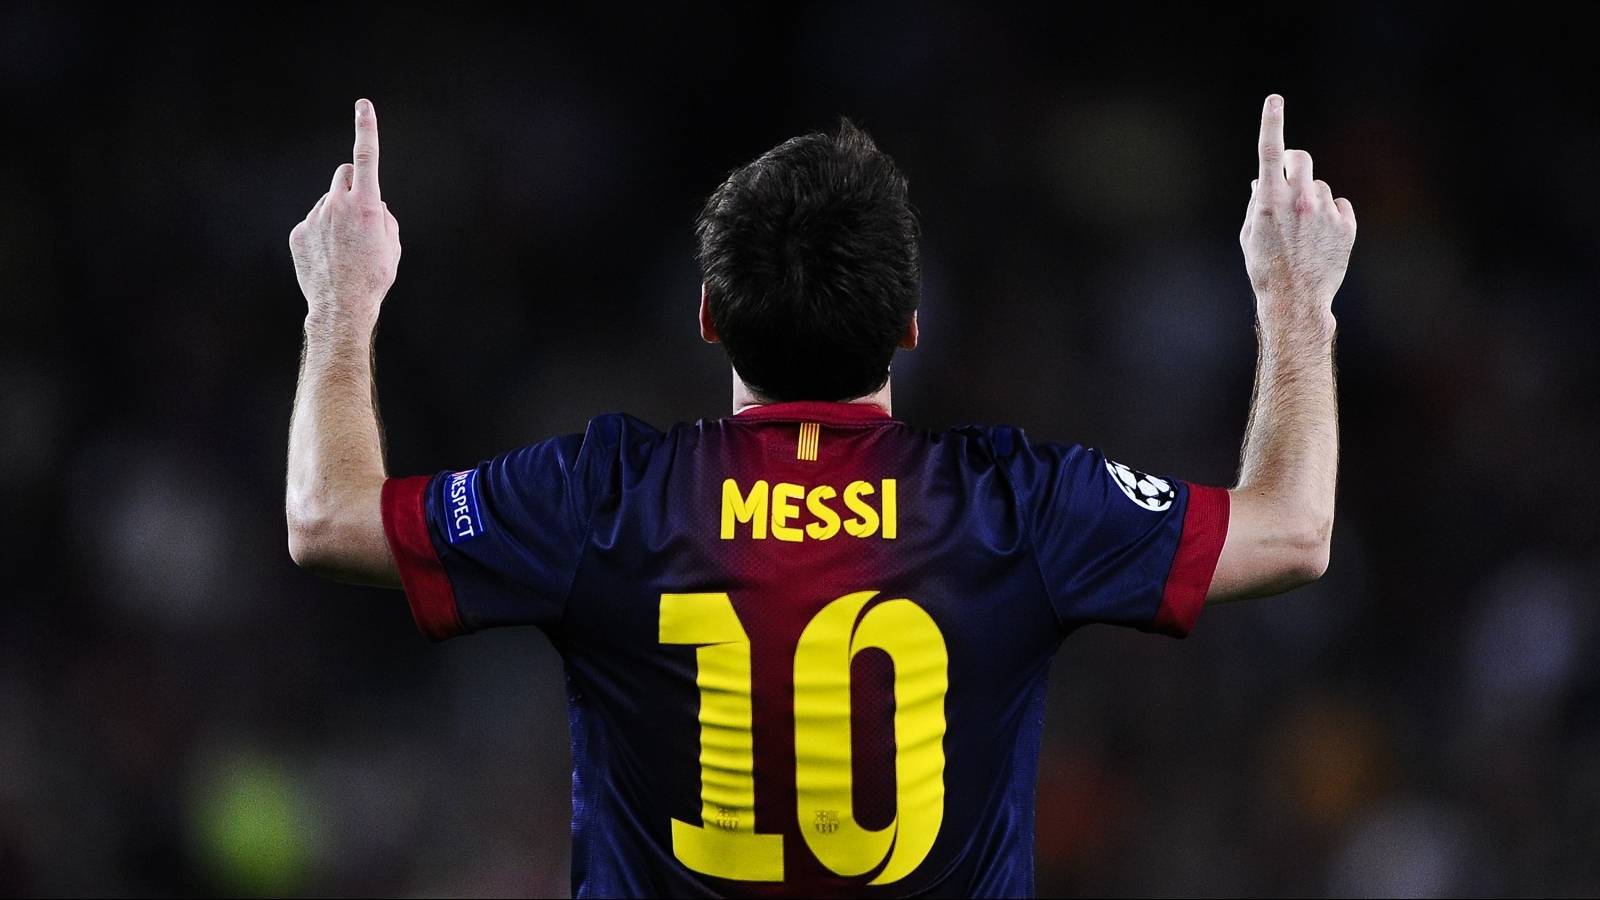 lionel andres messi, people, sports, men, football, black High Definition image